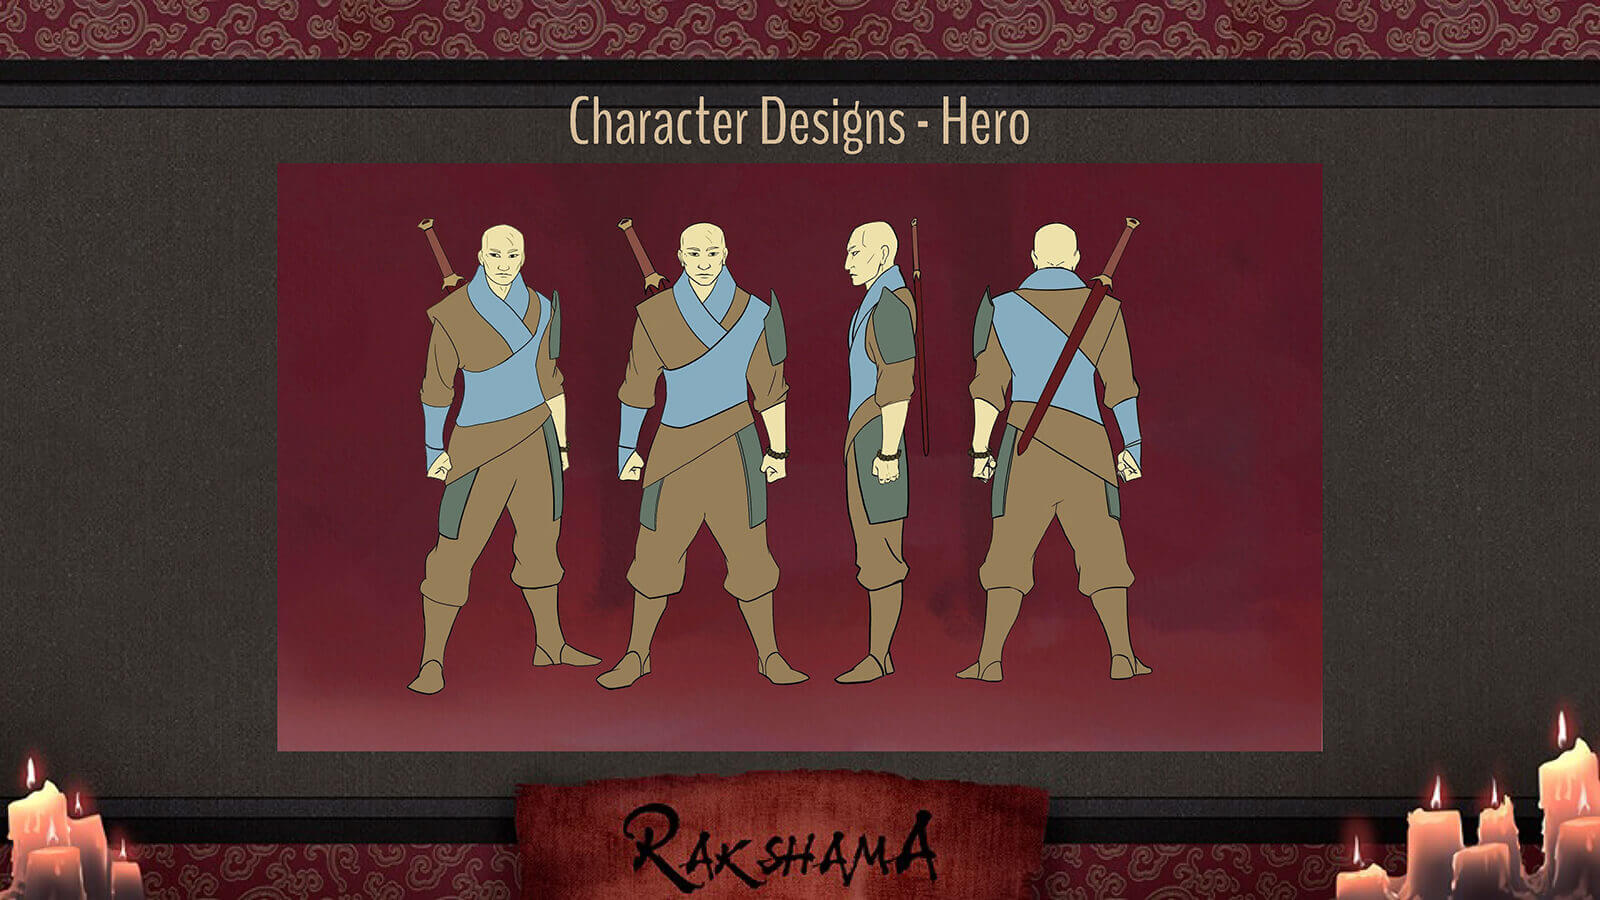 Character Design slide for the film Rakshama, depicting the Hero character, a warrior in a blue and brown clothing and sword